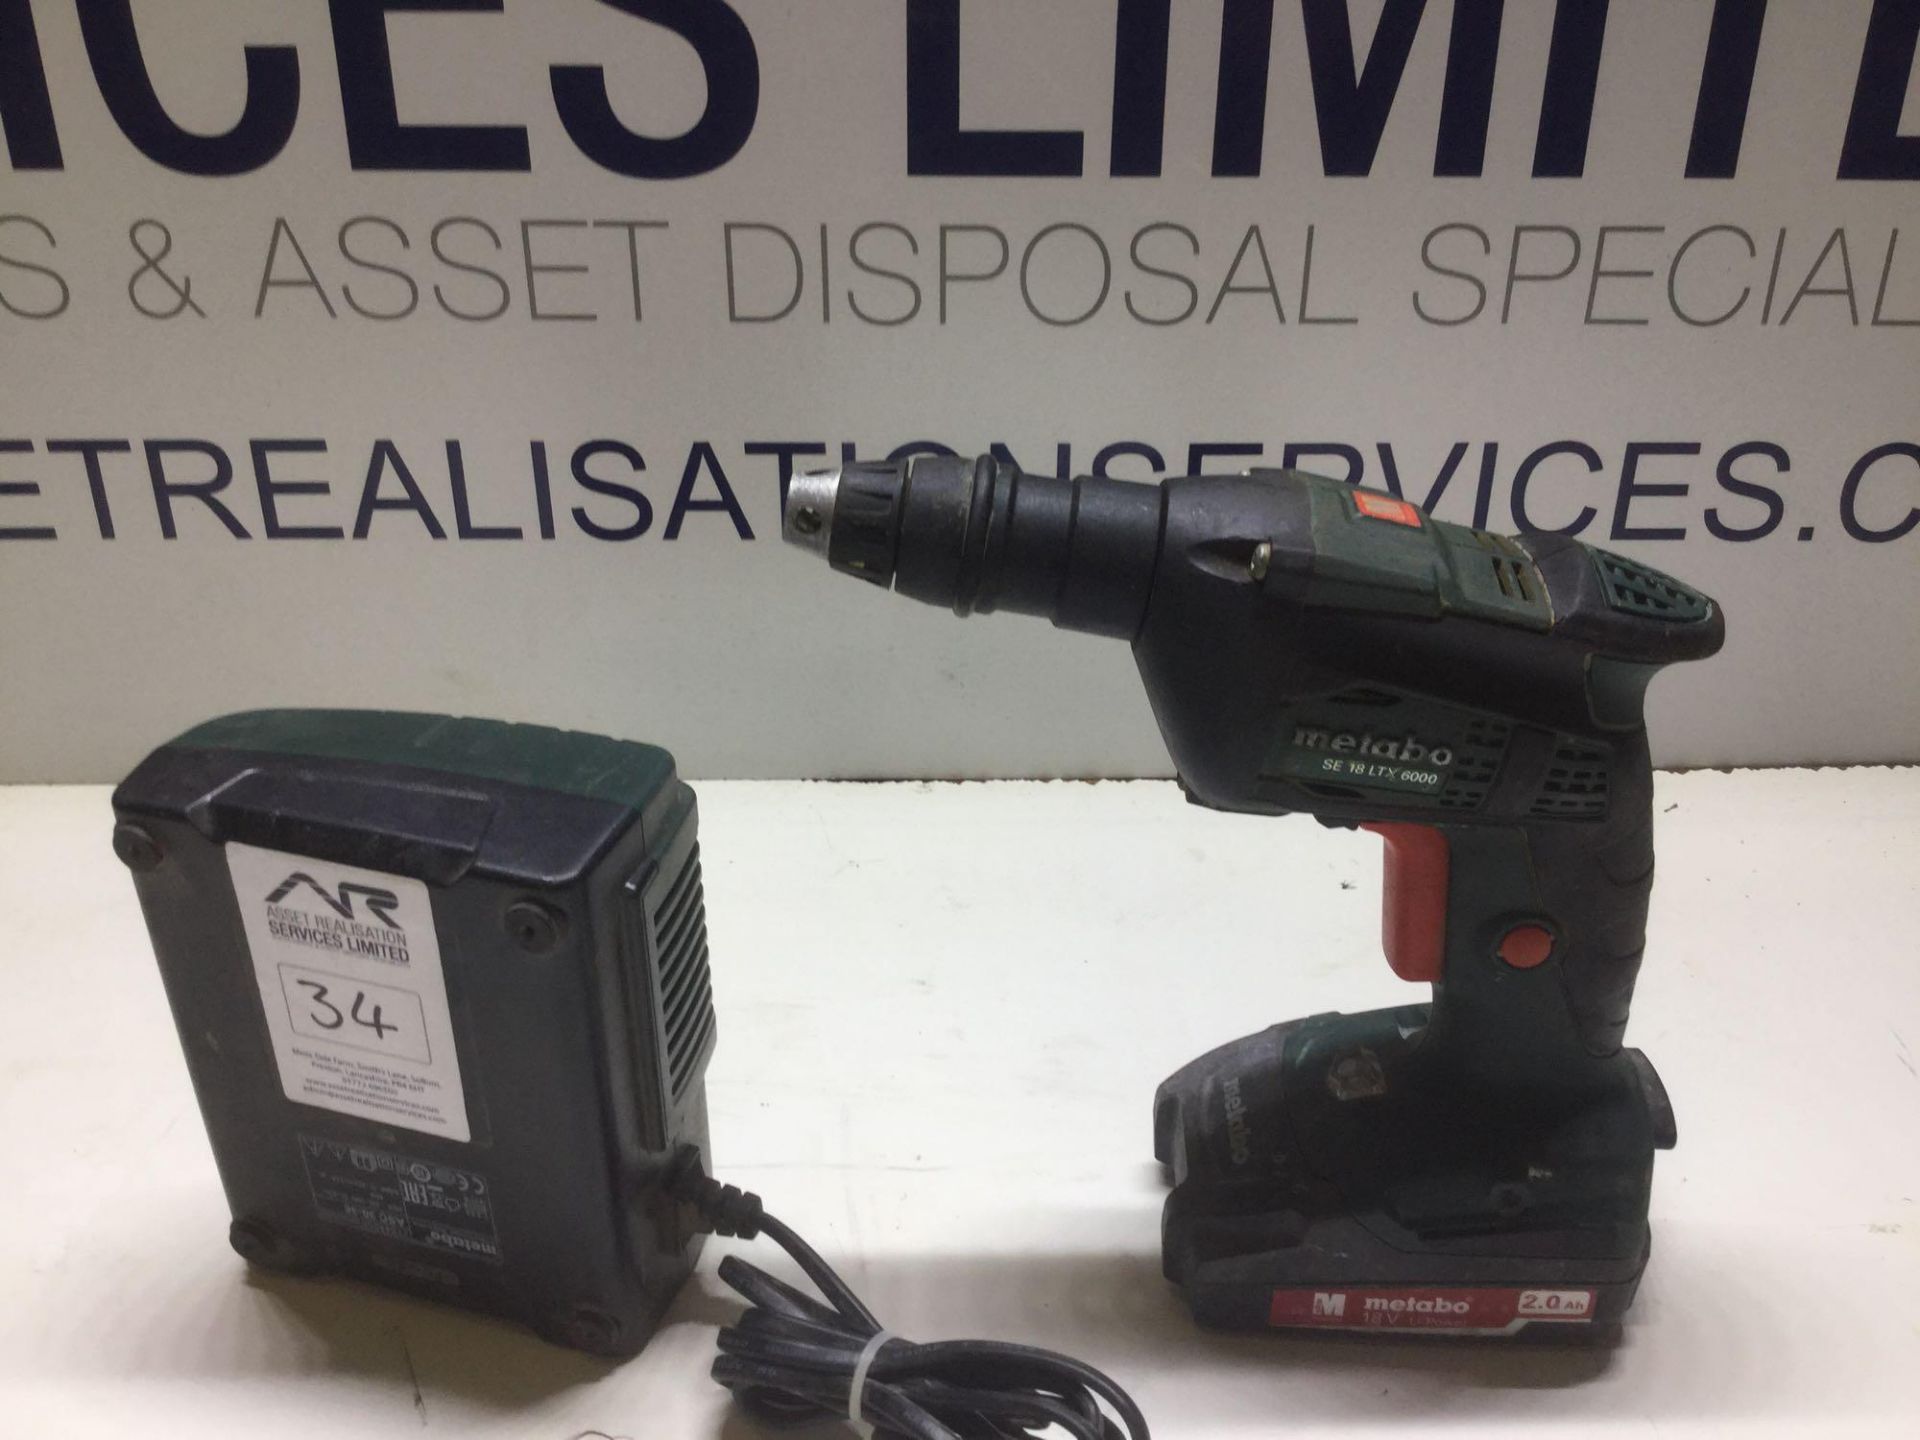 Metabo SE 18 LTX 6000 18v Cordless Tec Drill With Charger & Battery